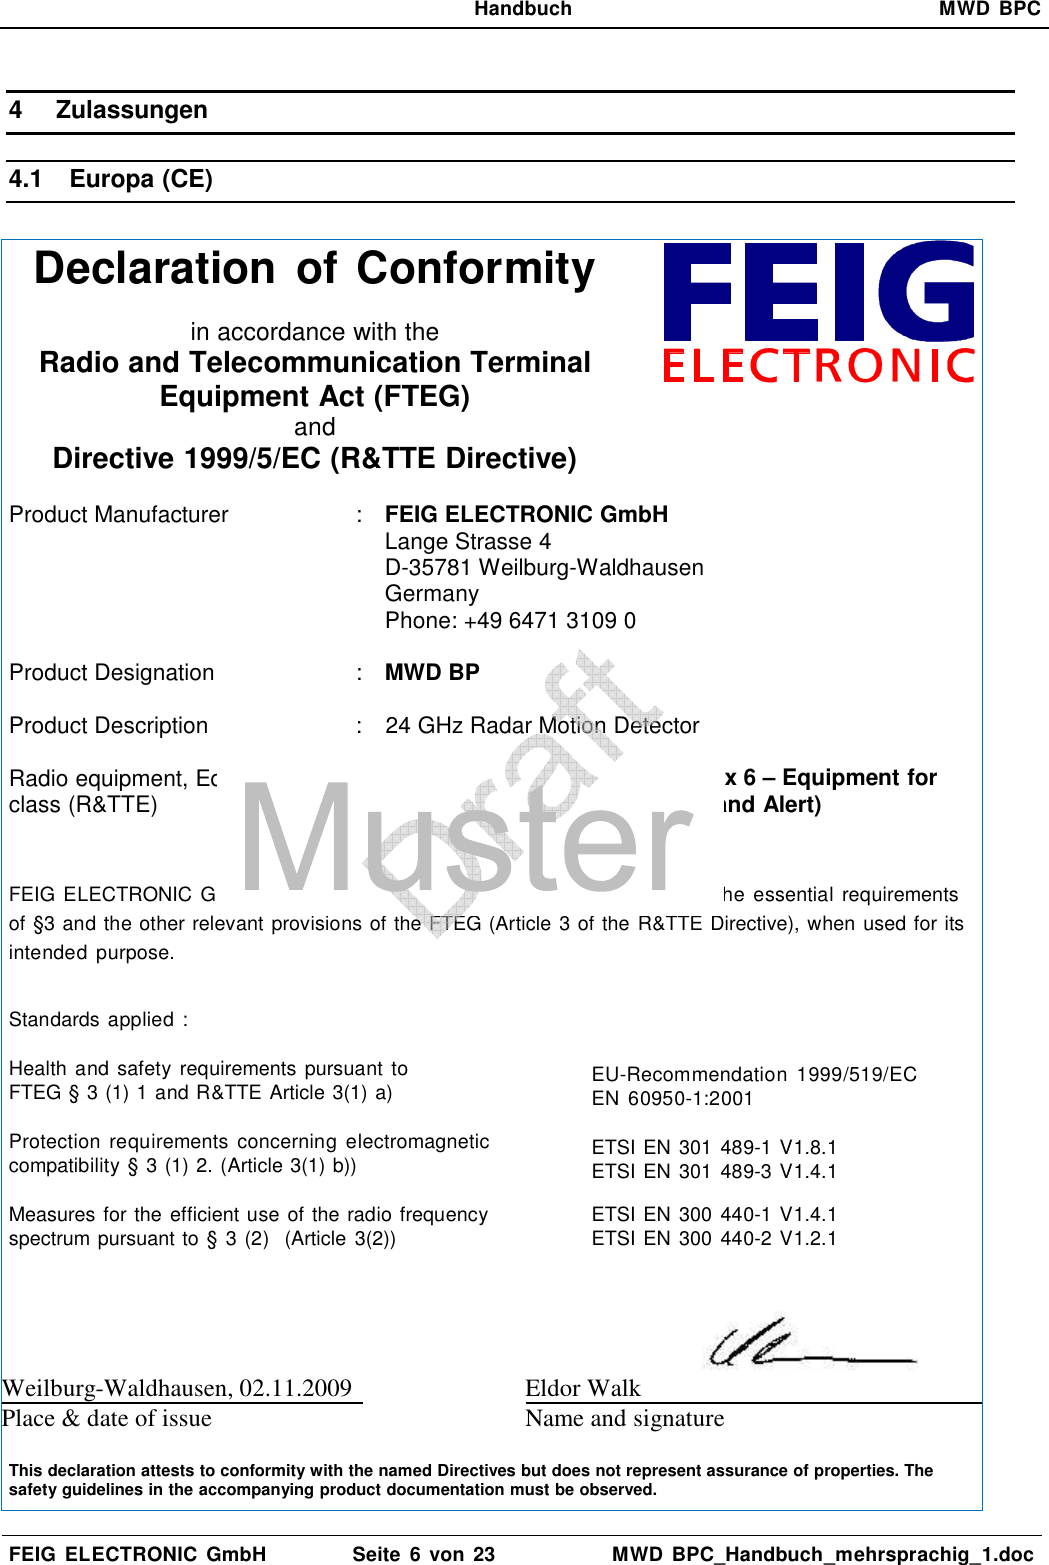   Handbuch  MWD  BPC  FEIG  ELECTRONIC  GmbH  Seite  6 von 23  MWD  BPC_Handbuch_mehrsprachig_1.doc  4  Zulassungen 4.1  Europa (CE)  Declaration of Conformity   in accordance with the Radio and Telecommunication Terminal Equipment Act (FTEG) and Directive 1999/5/EC (R&amp;TTE Directive)   Product Manufacturer   :  FEIG ELECTRONIC GmbH Lange Strasse 4 D-35781 Weilburg-Waldhausen Germany Phone: +49 6471 3109 0  Product Designation  :  MWD BP   Product Description  :  24 GHz Radar Motion Detector  Radio equipment, Equipment class (R&amp;TTE)  :  Class 2: (ERC/REC 70-03, Annex 6 – Equipment for      Detecting Movement and Alert)     FEIG ELECTRONIC  GmbH declares  that  the  radio  equipment  complies with  the  essential requirements of §3 and the other relevant provisions of the FTEG (Article 3 of the R&amp;TTE Directive), when used for its intended  purpose.  Standards applied : Health and  safety  requirements pursuant  to FTEG § 3 (1) 1 and R&amp;TTE Article 3(1) a)   EU-Recommendation  1999/519/EC EN  60950-1:2001 Protection  requirements  concerning  electromagnetic compatibility § 3 (1) 2. (Article 3(1) b))   ETSI EN 301 489-1 V1.8.1 ETSI EN 301 489-3 V1.4.1 Measures for the efficient use of the radio frequency spectrum pursuant to § 3 (2)  (Article 3(2))   ETSI EN 300 440-1 V1.4.1 ETSI EN 300 440-2 V1.2.1  Weilburg-Waldhausen, 02.11.2009  Eldor Walk   Place &amp; date of issue Name and signature   This declaration attests to conformity with the named Directives but does not represent assurance of properties. The safety guidelines in the accompanying product documentation must be observed.  